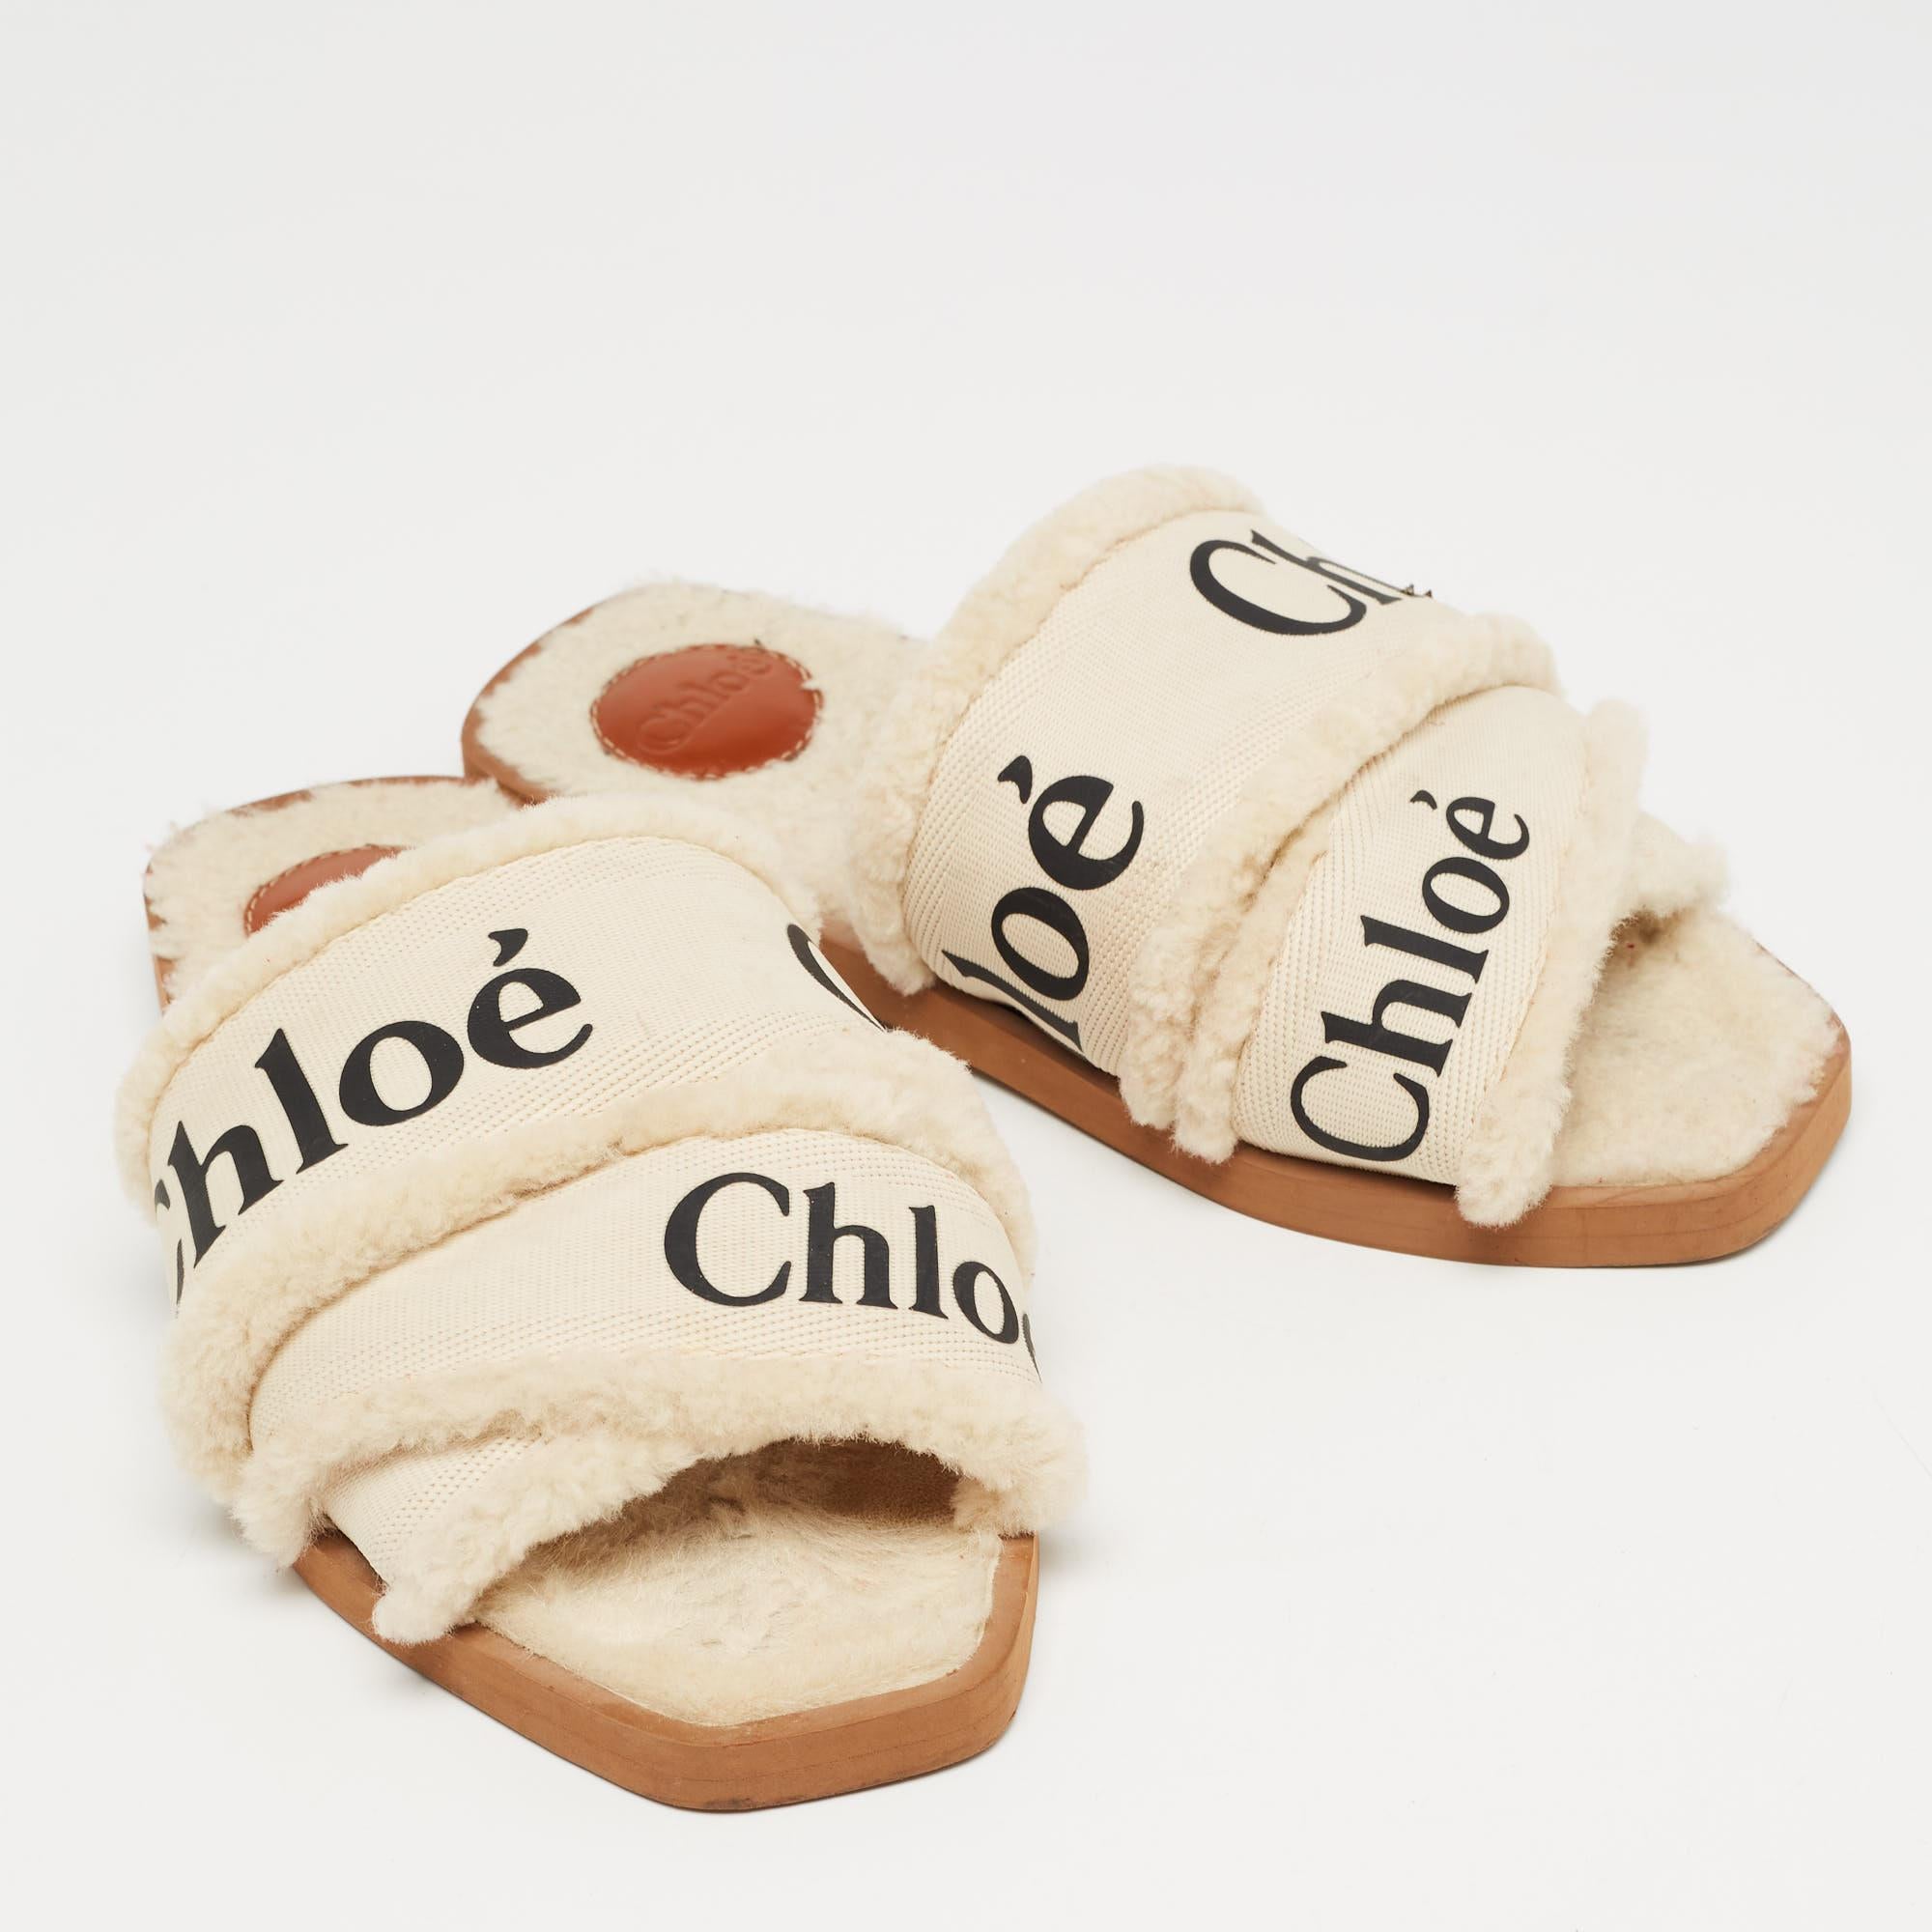 Run errands around the city or enjoy your beach vacay while you look chic wearing these Woody slides from Chloé. They feature logo-printed straps, open toes, and rubber soles.

